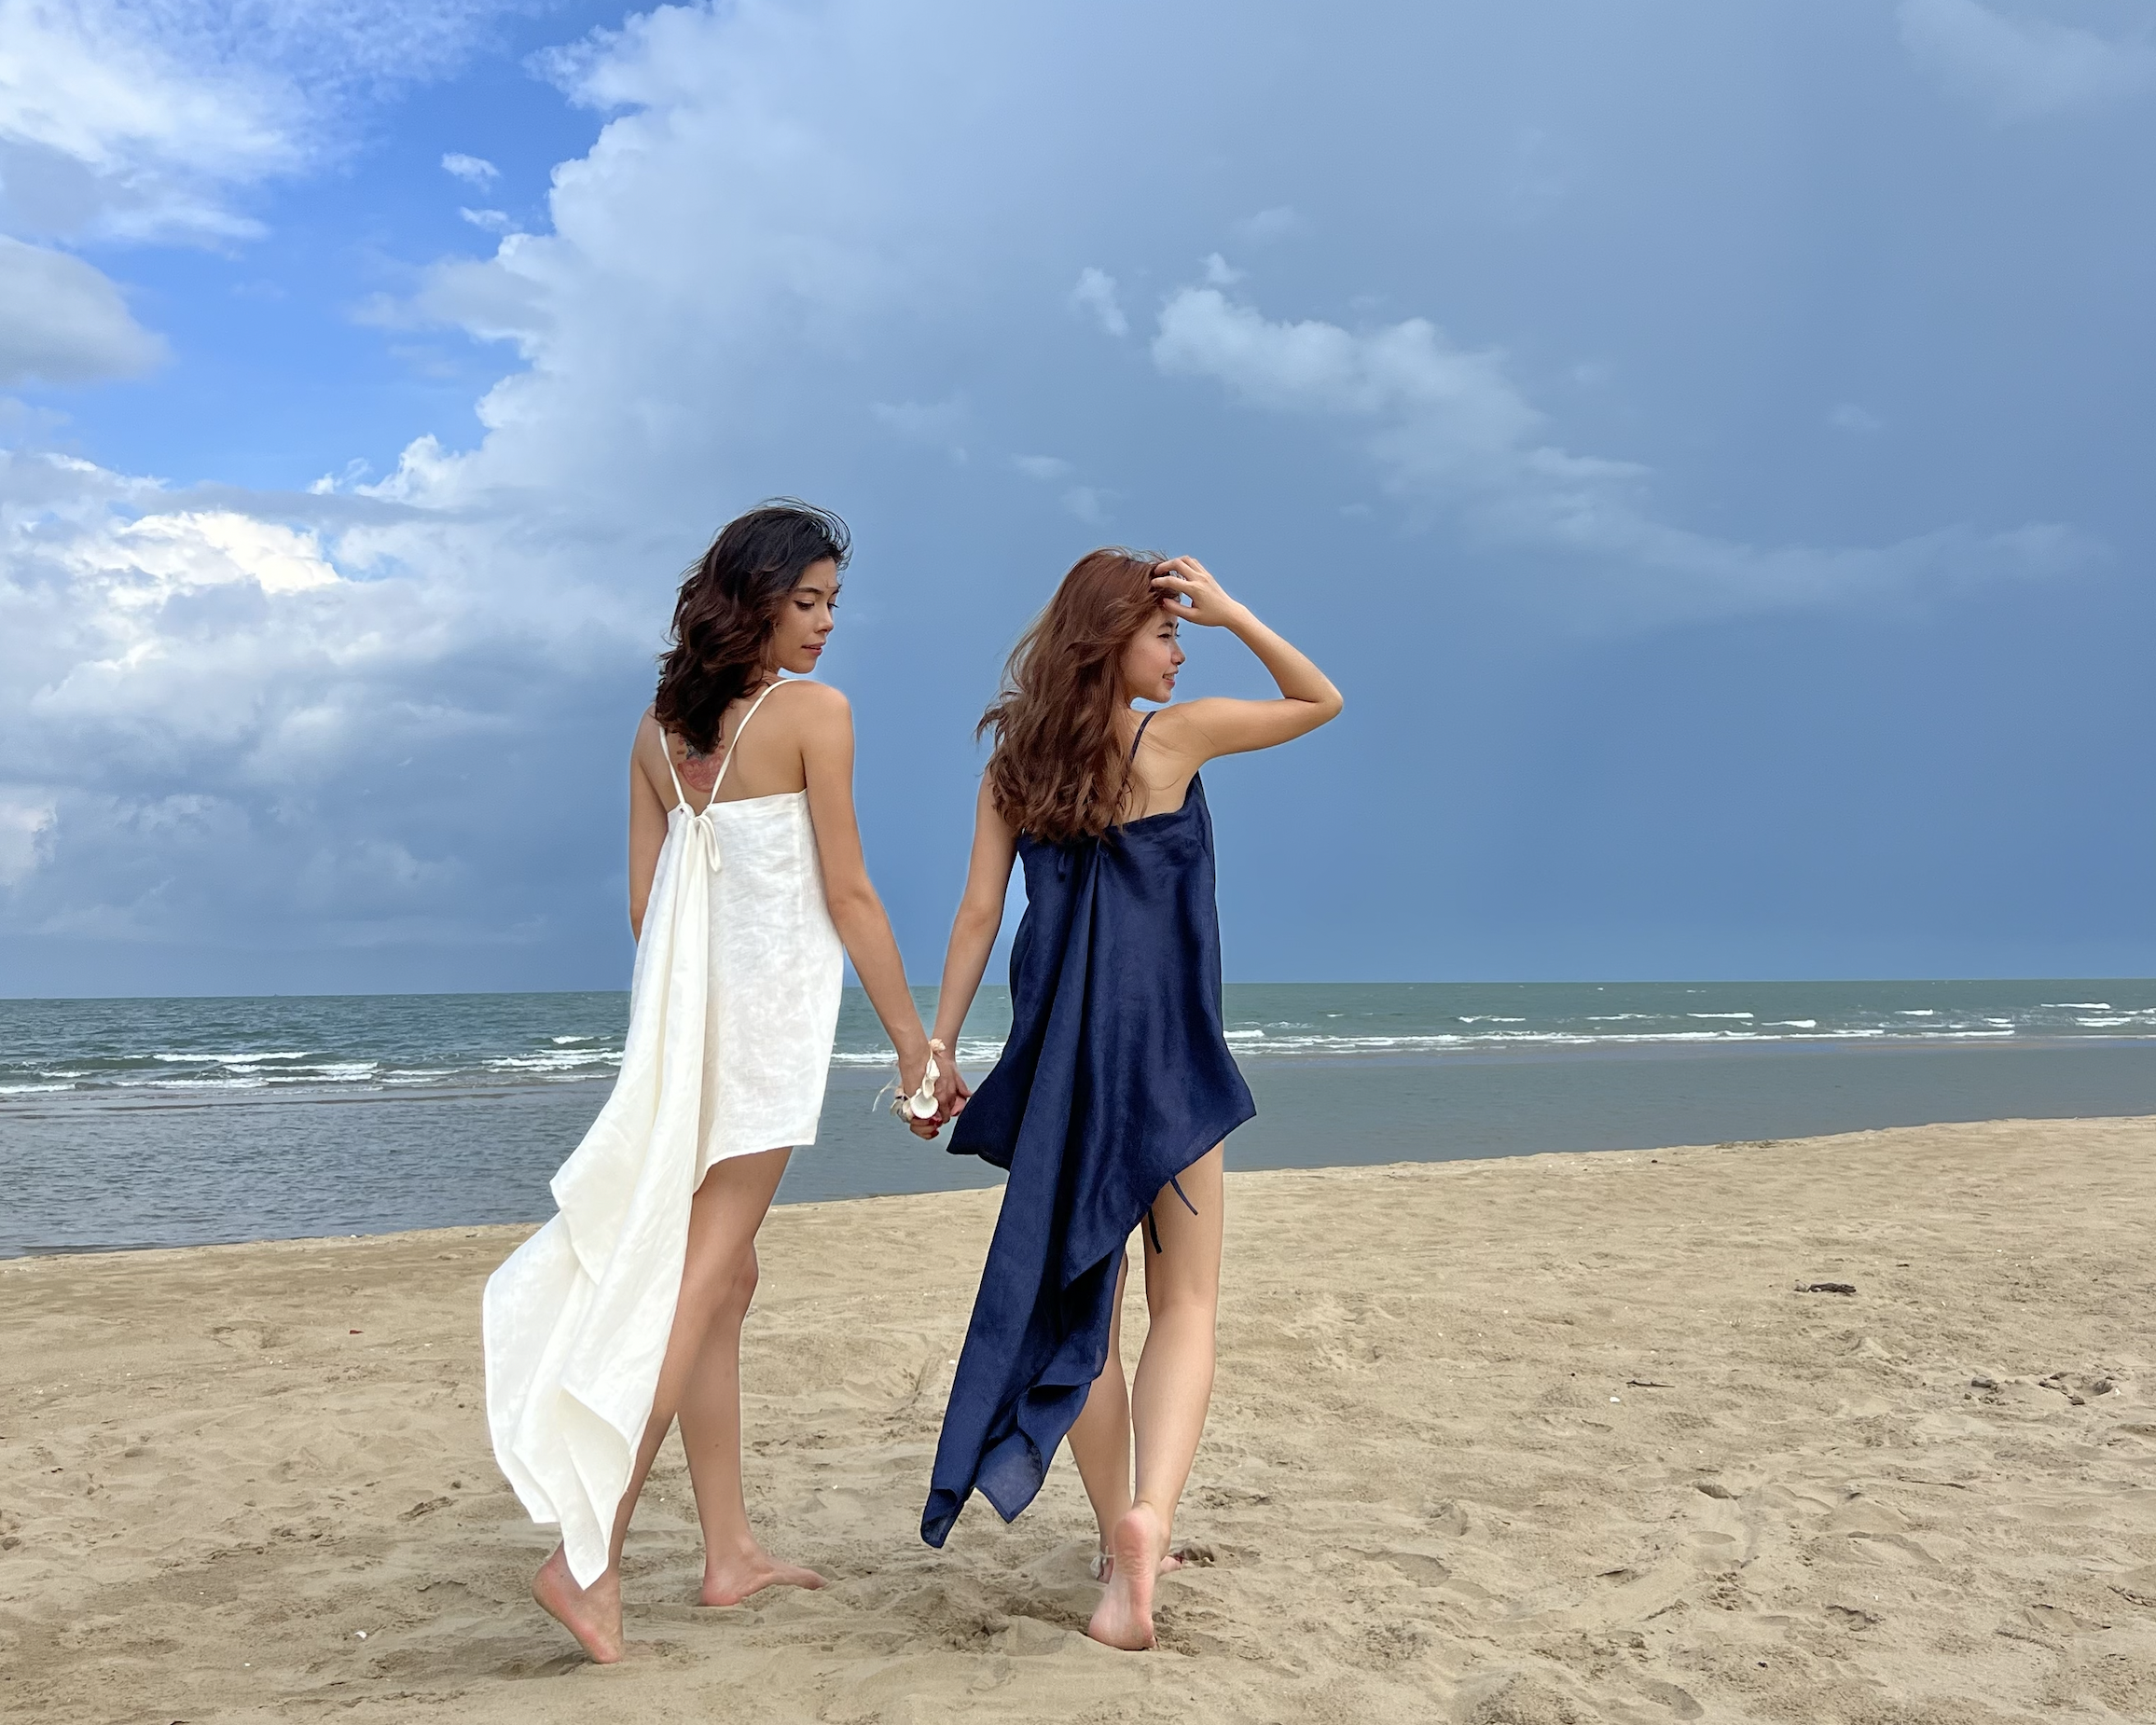 Two women standing in flowing dresses on a beach